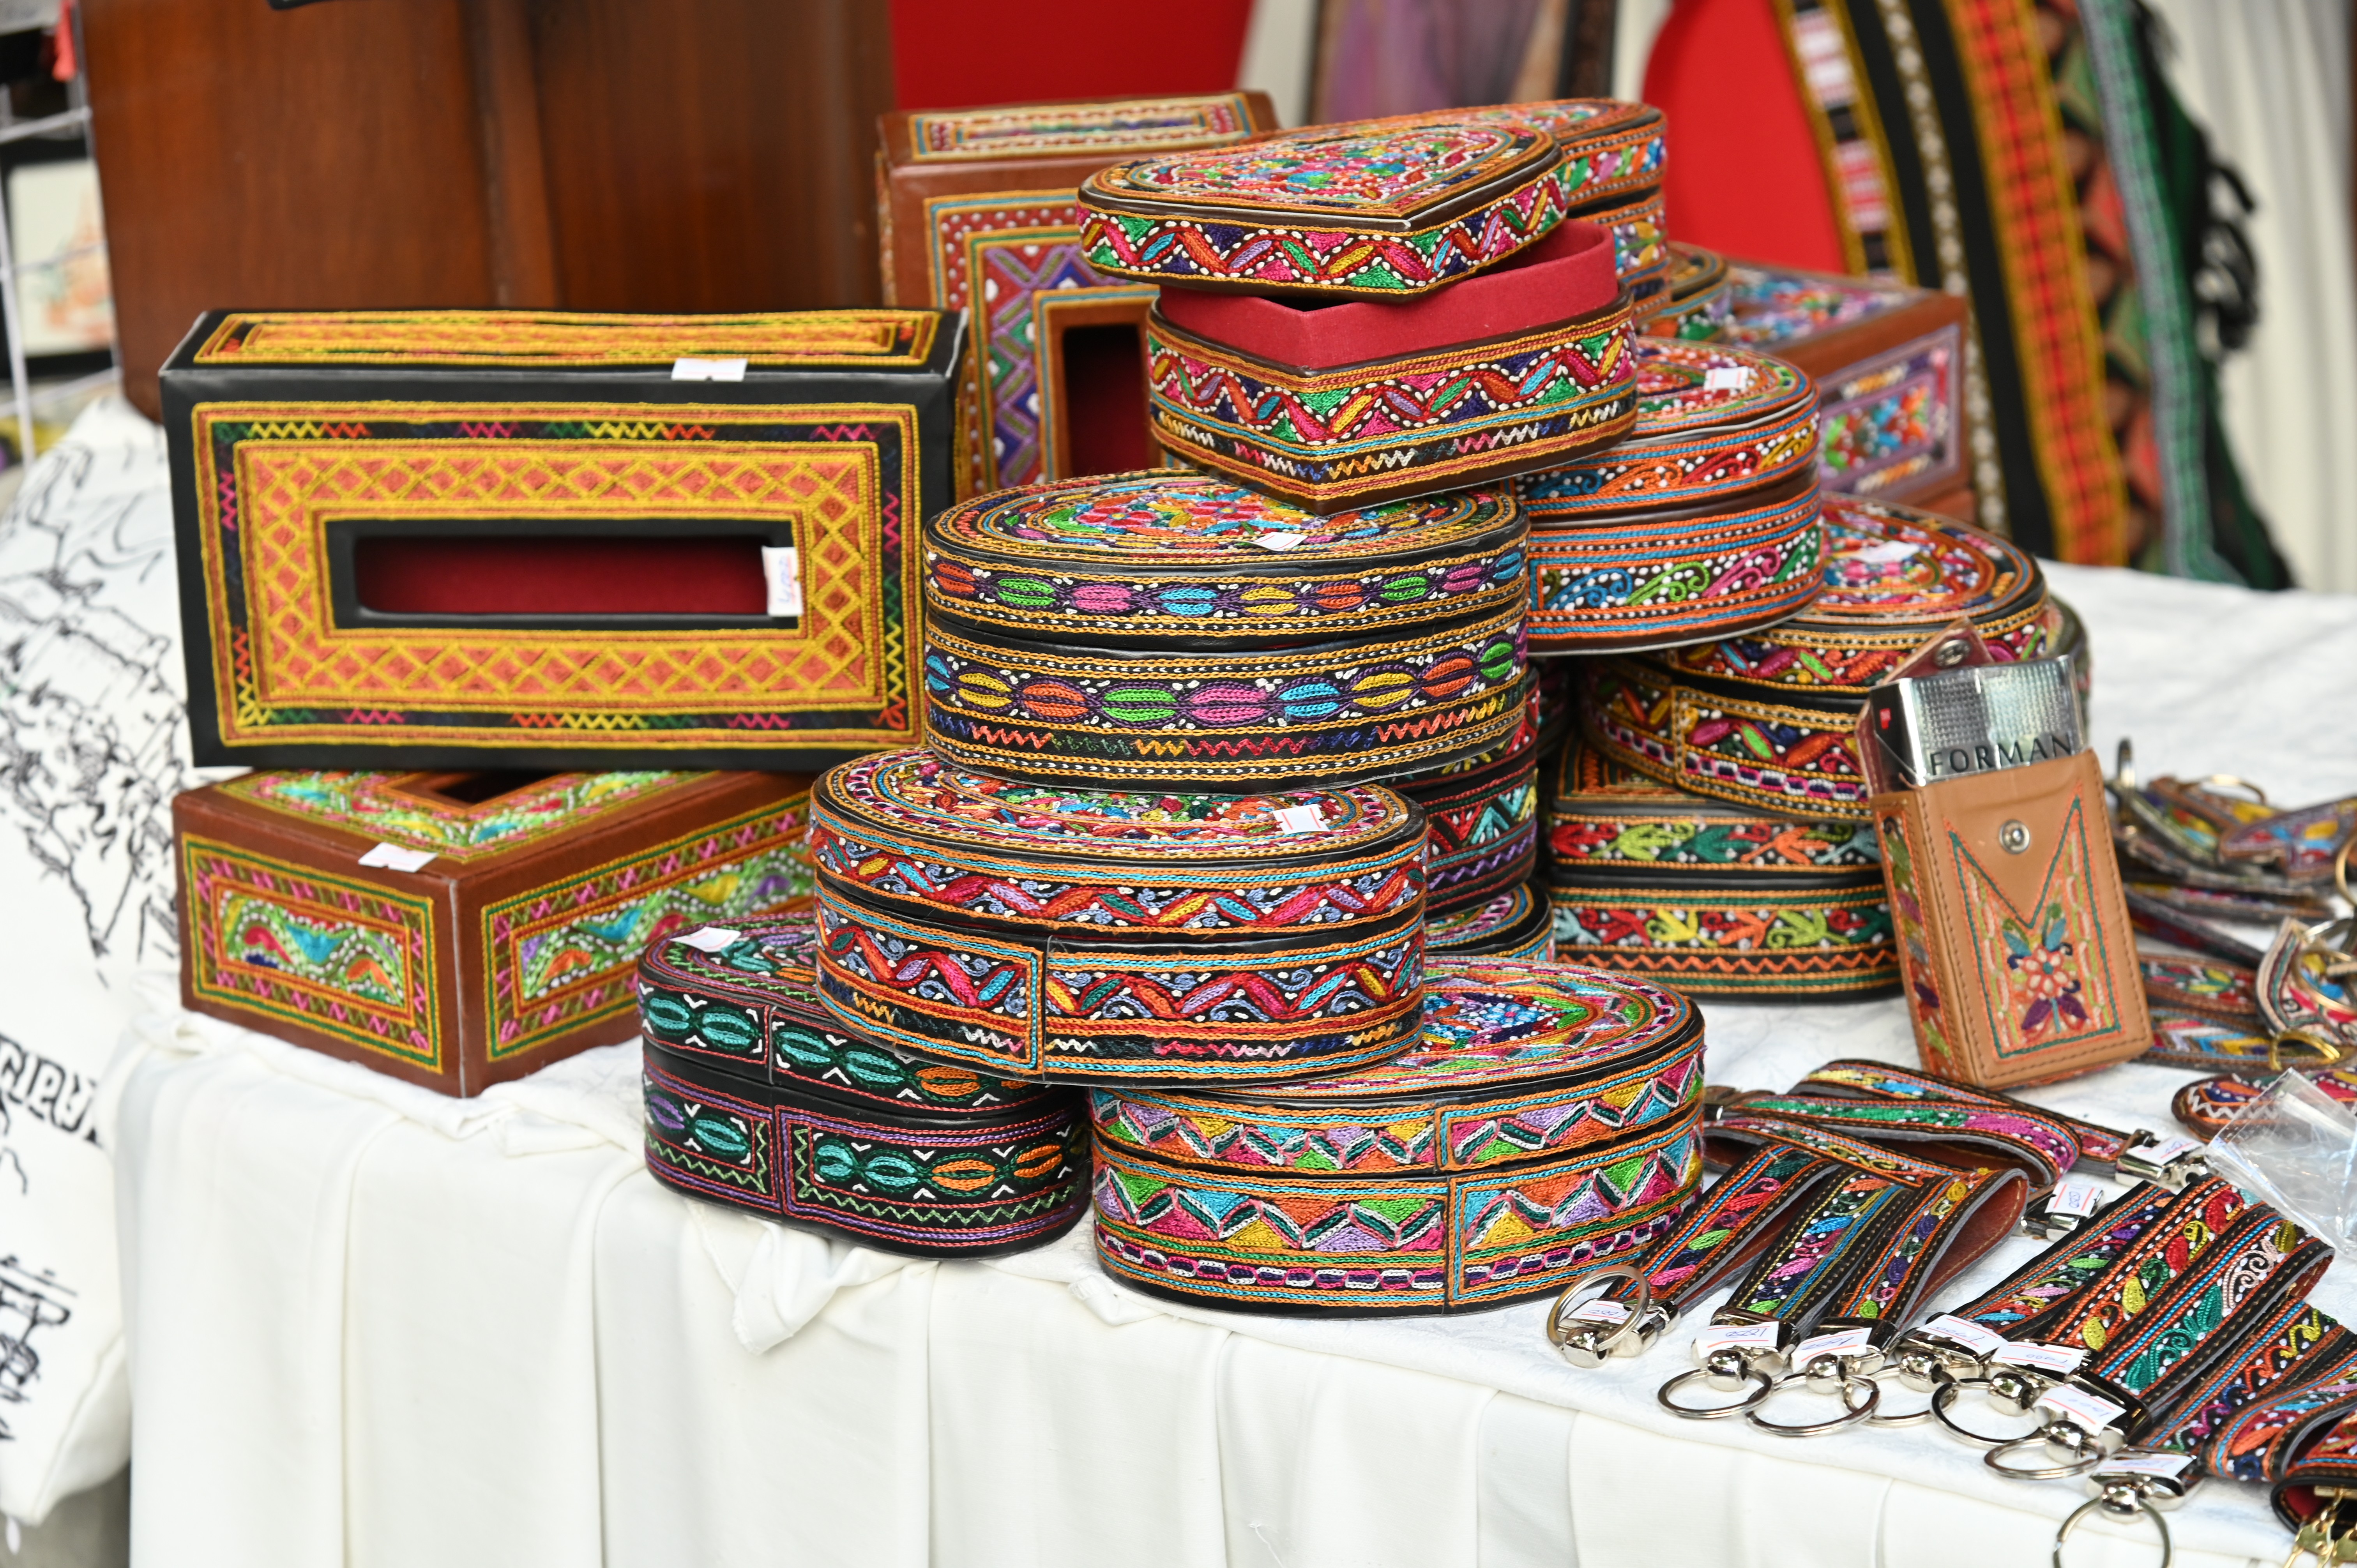 The collection of Embroidered handmade boxes